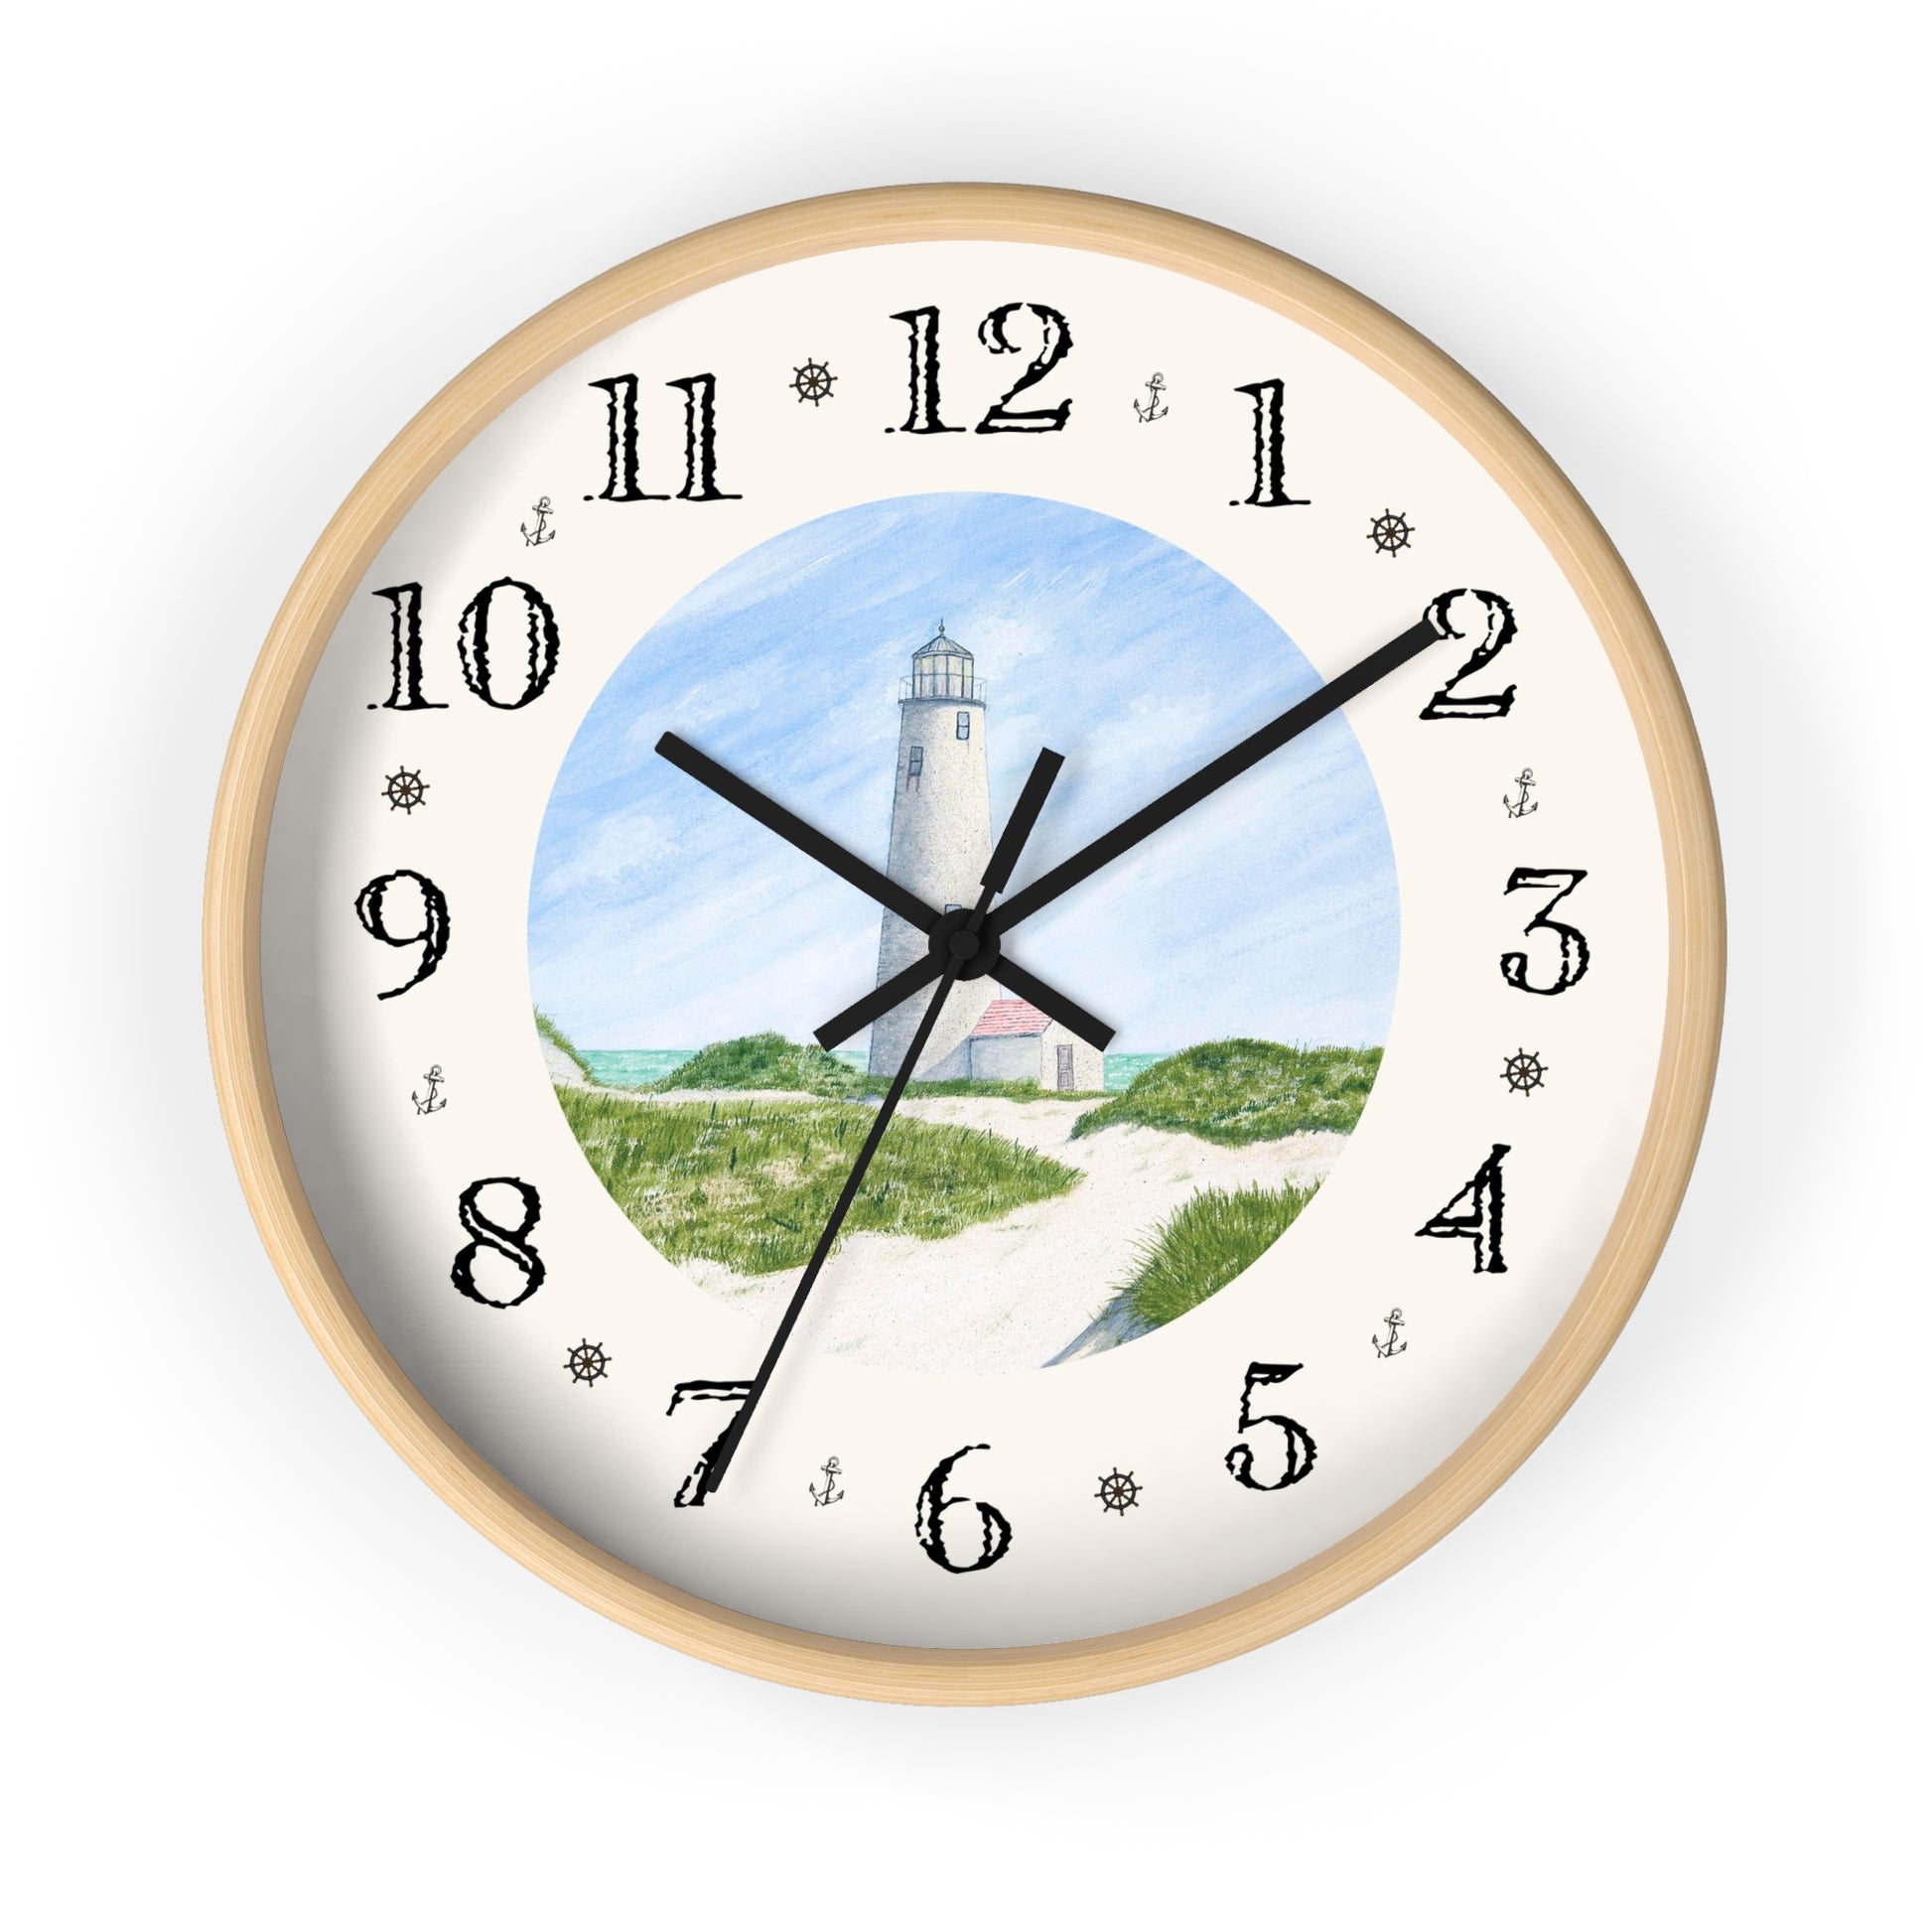 A charming Nantucket Lighthouse clock to add a special touch to your home. Great gift for lighthouse fans!